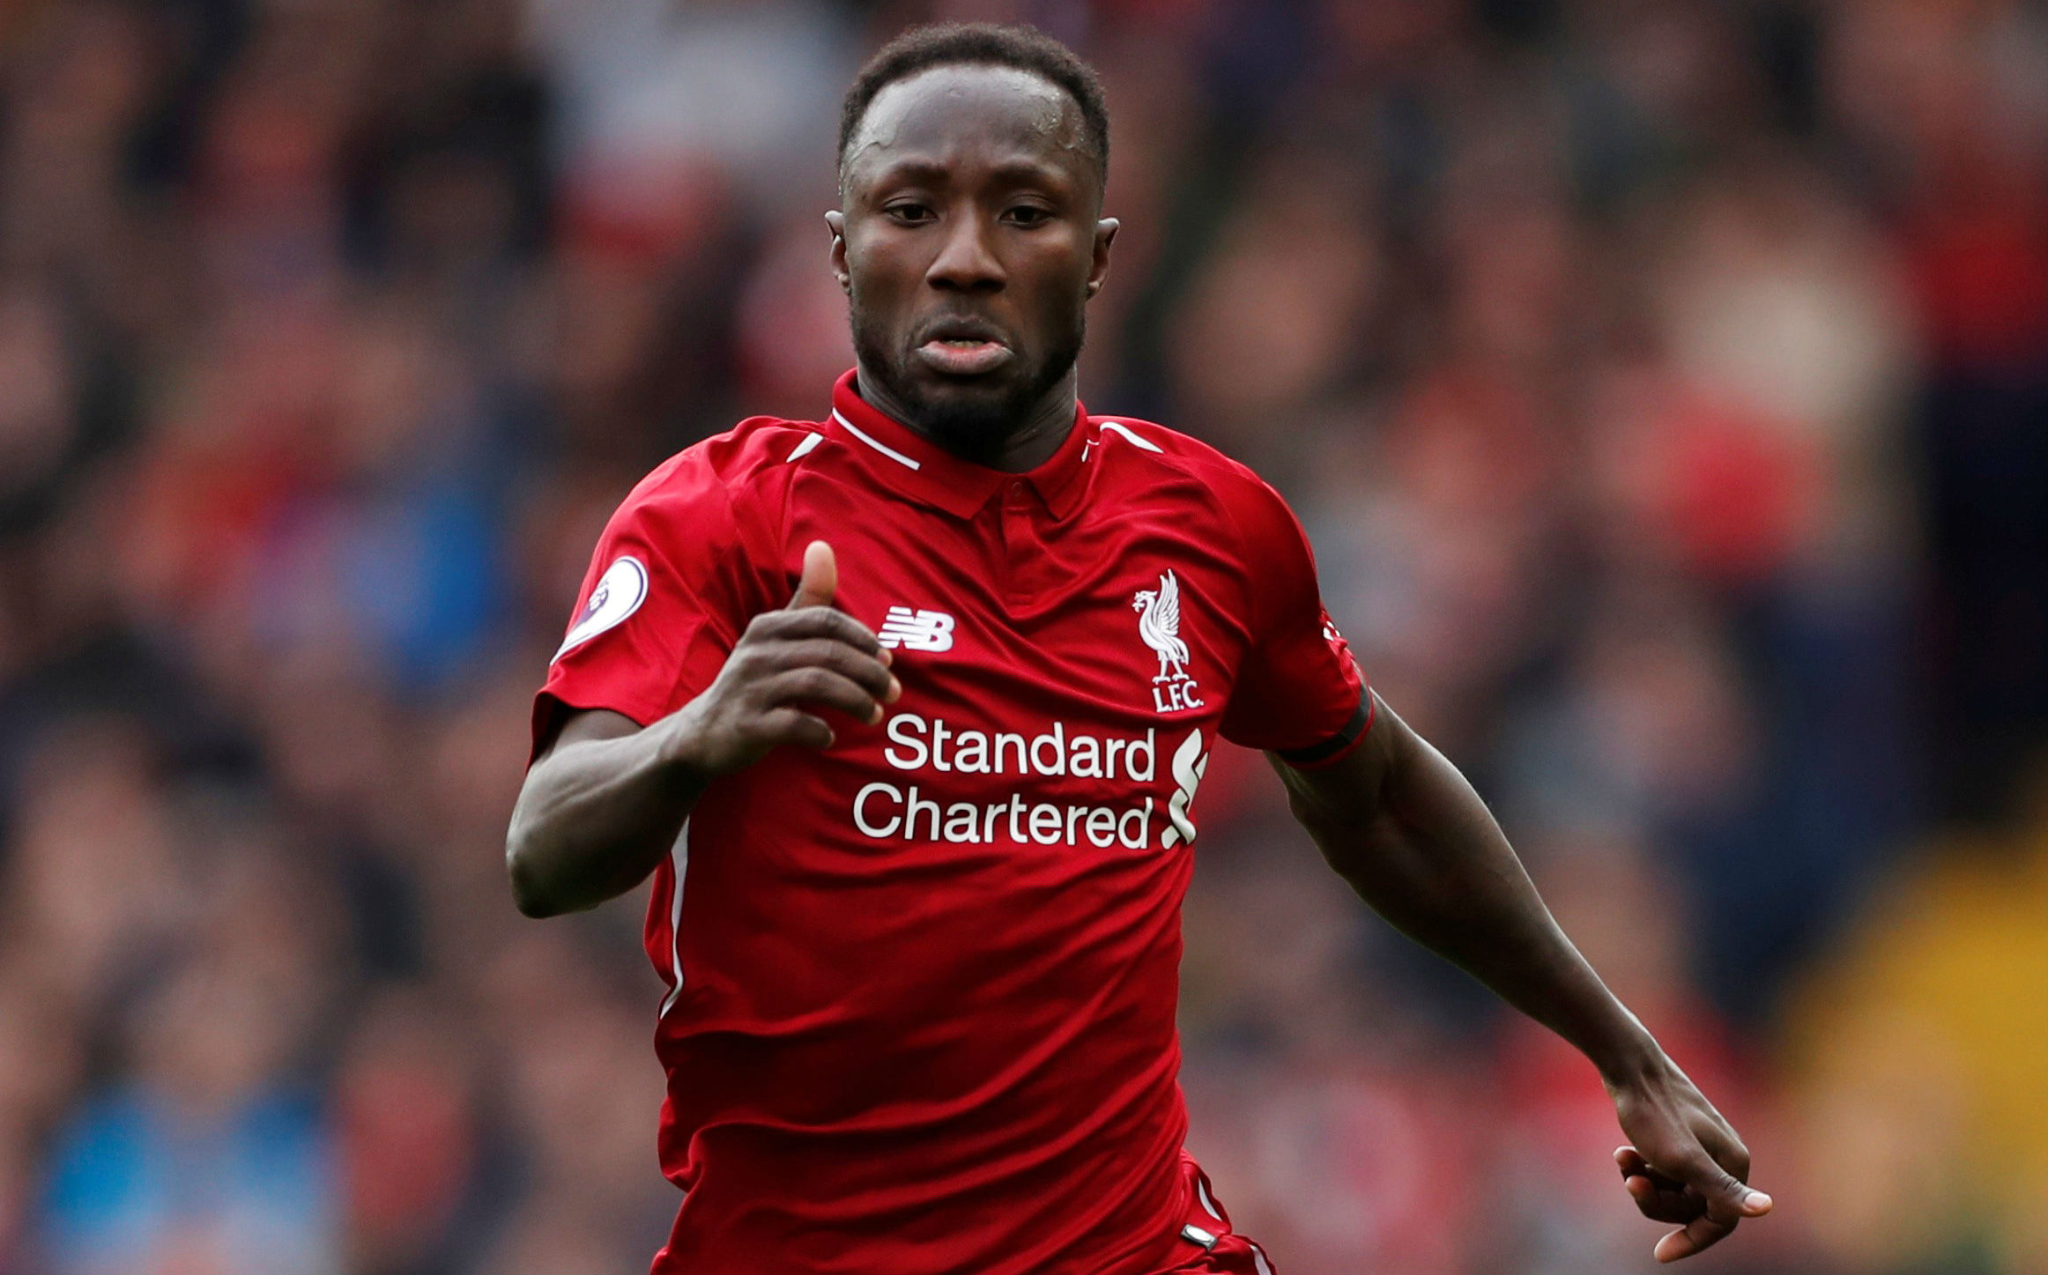 &quot;He is safe and well cared for&quot;, Liverpool on Naby Keita after a coup in Guinea